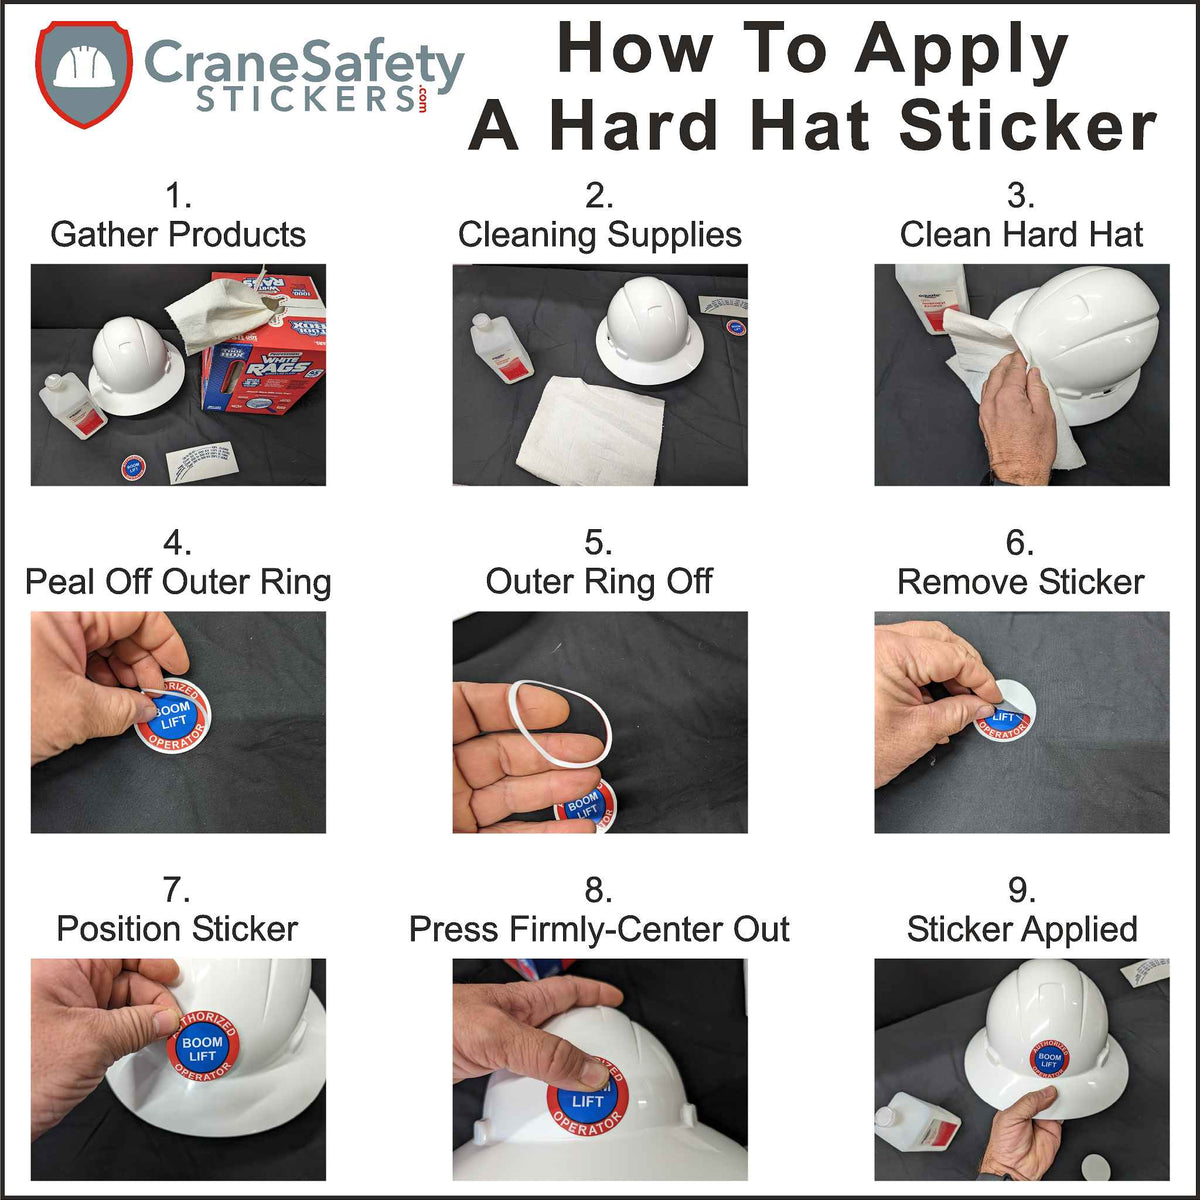 directions on how to apply our cpr certified sticker to a hard hat.